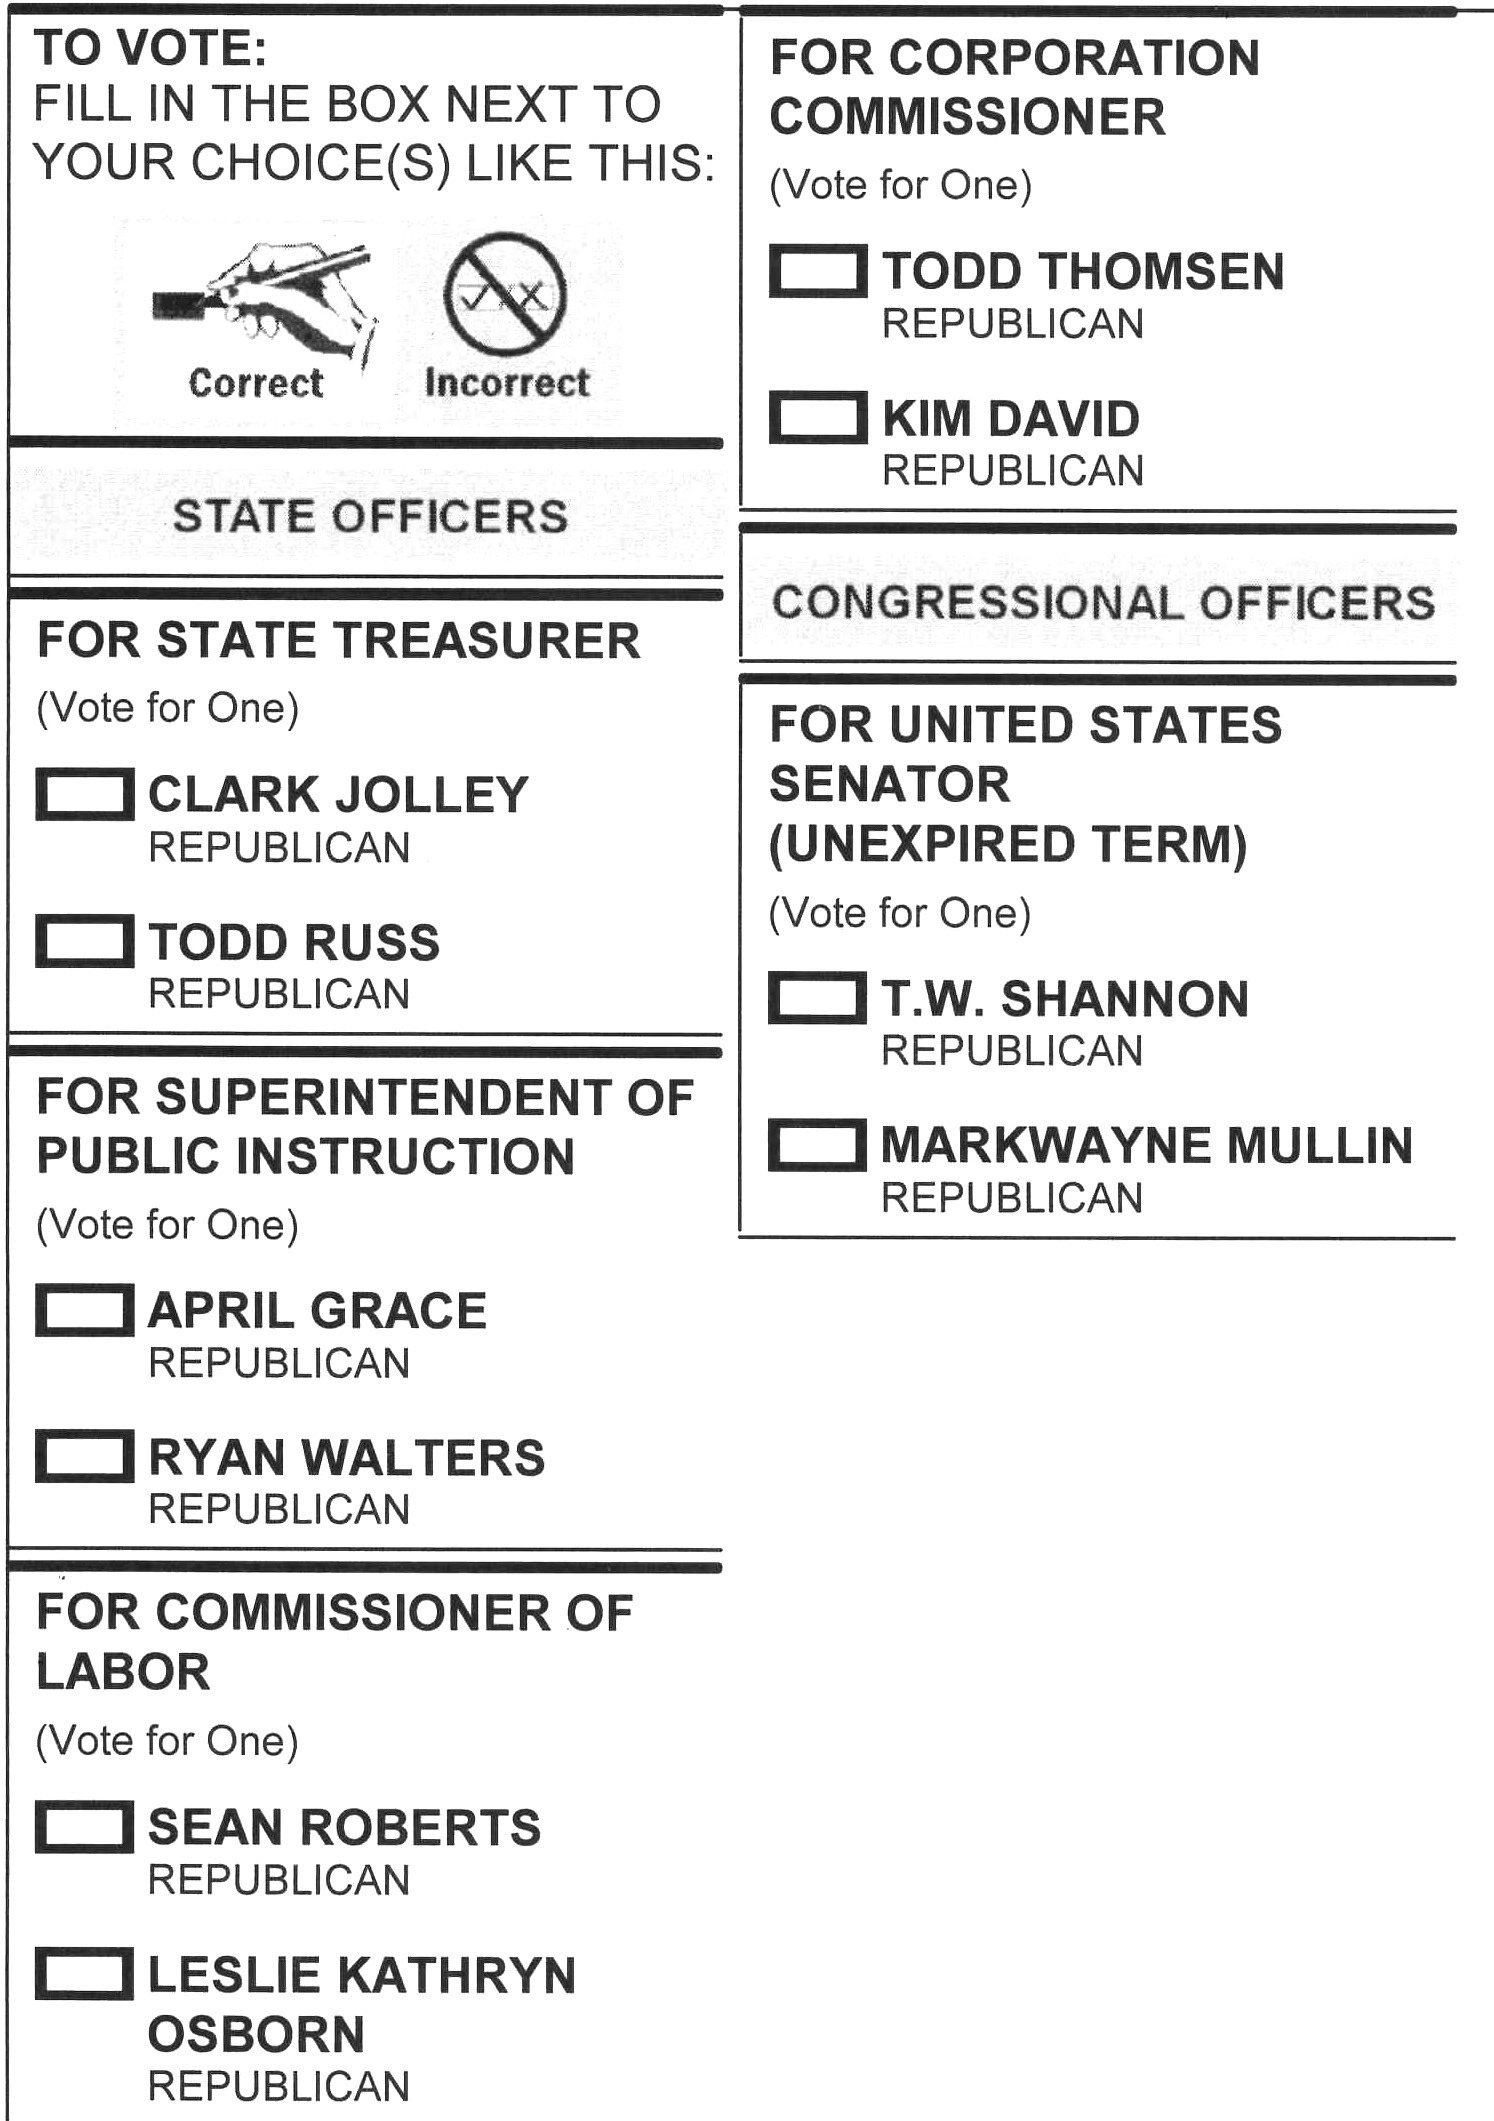 Sample ballots for Tuesday, August 23, 2022 Runoff Primary Election